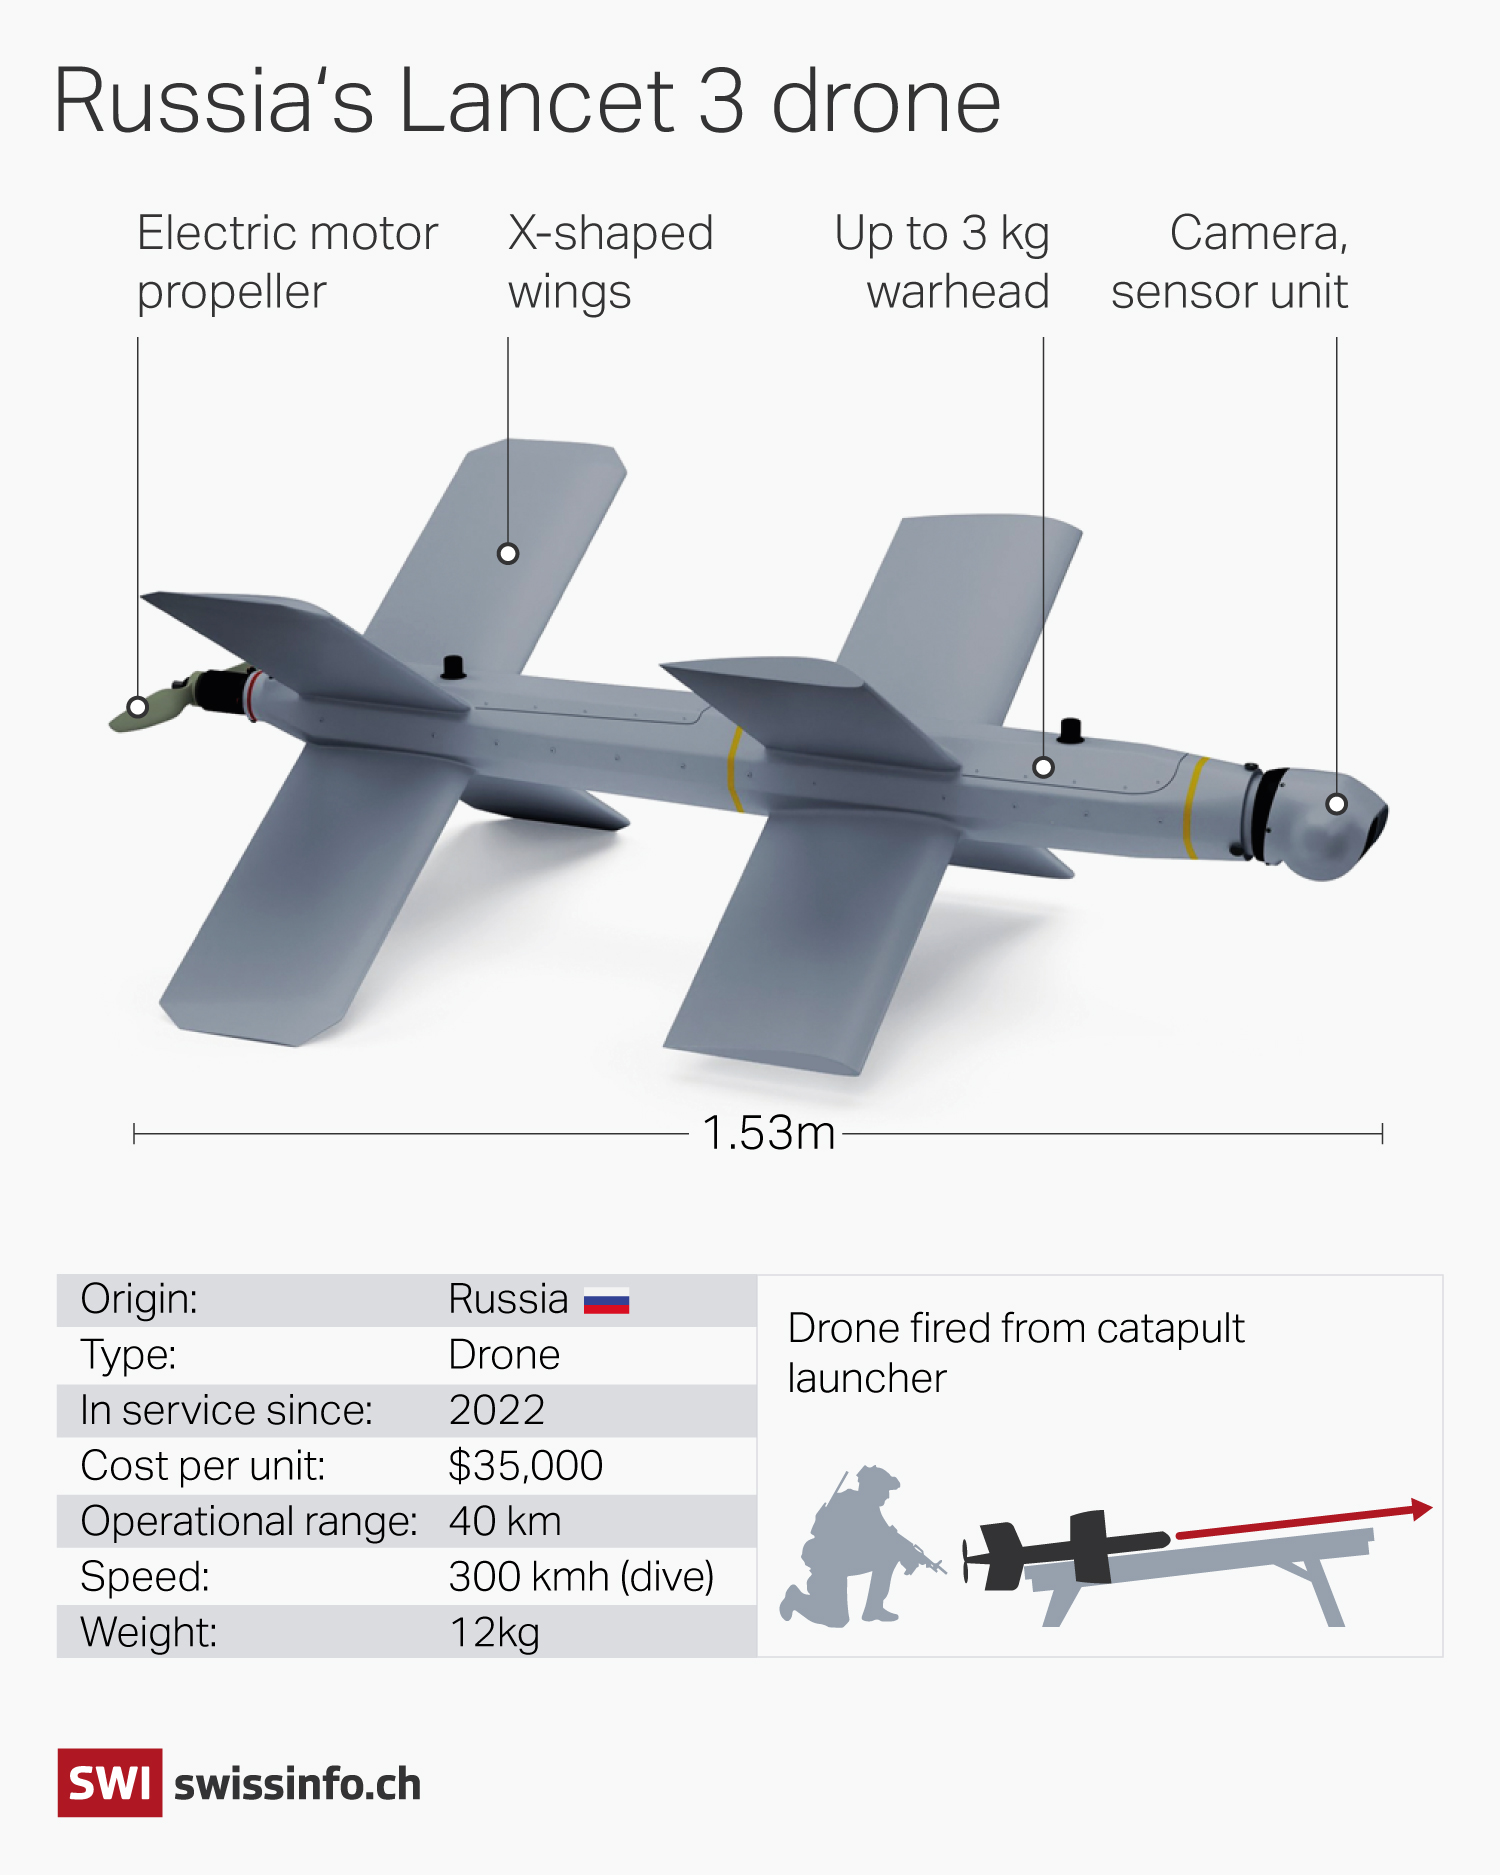 Composition of the Russian Lancet drone